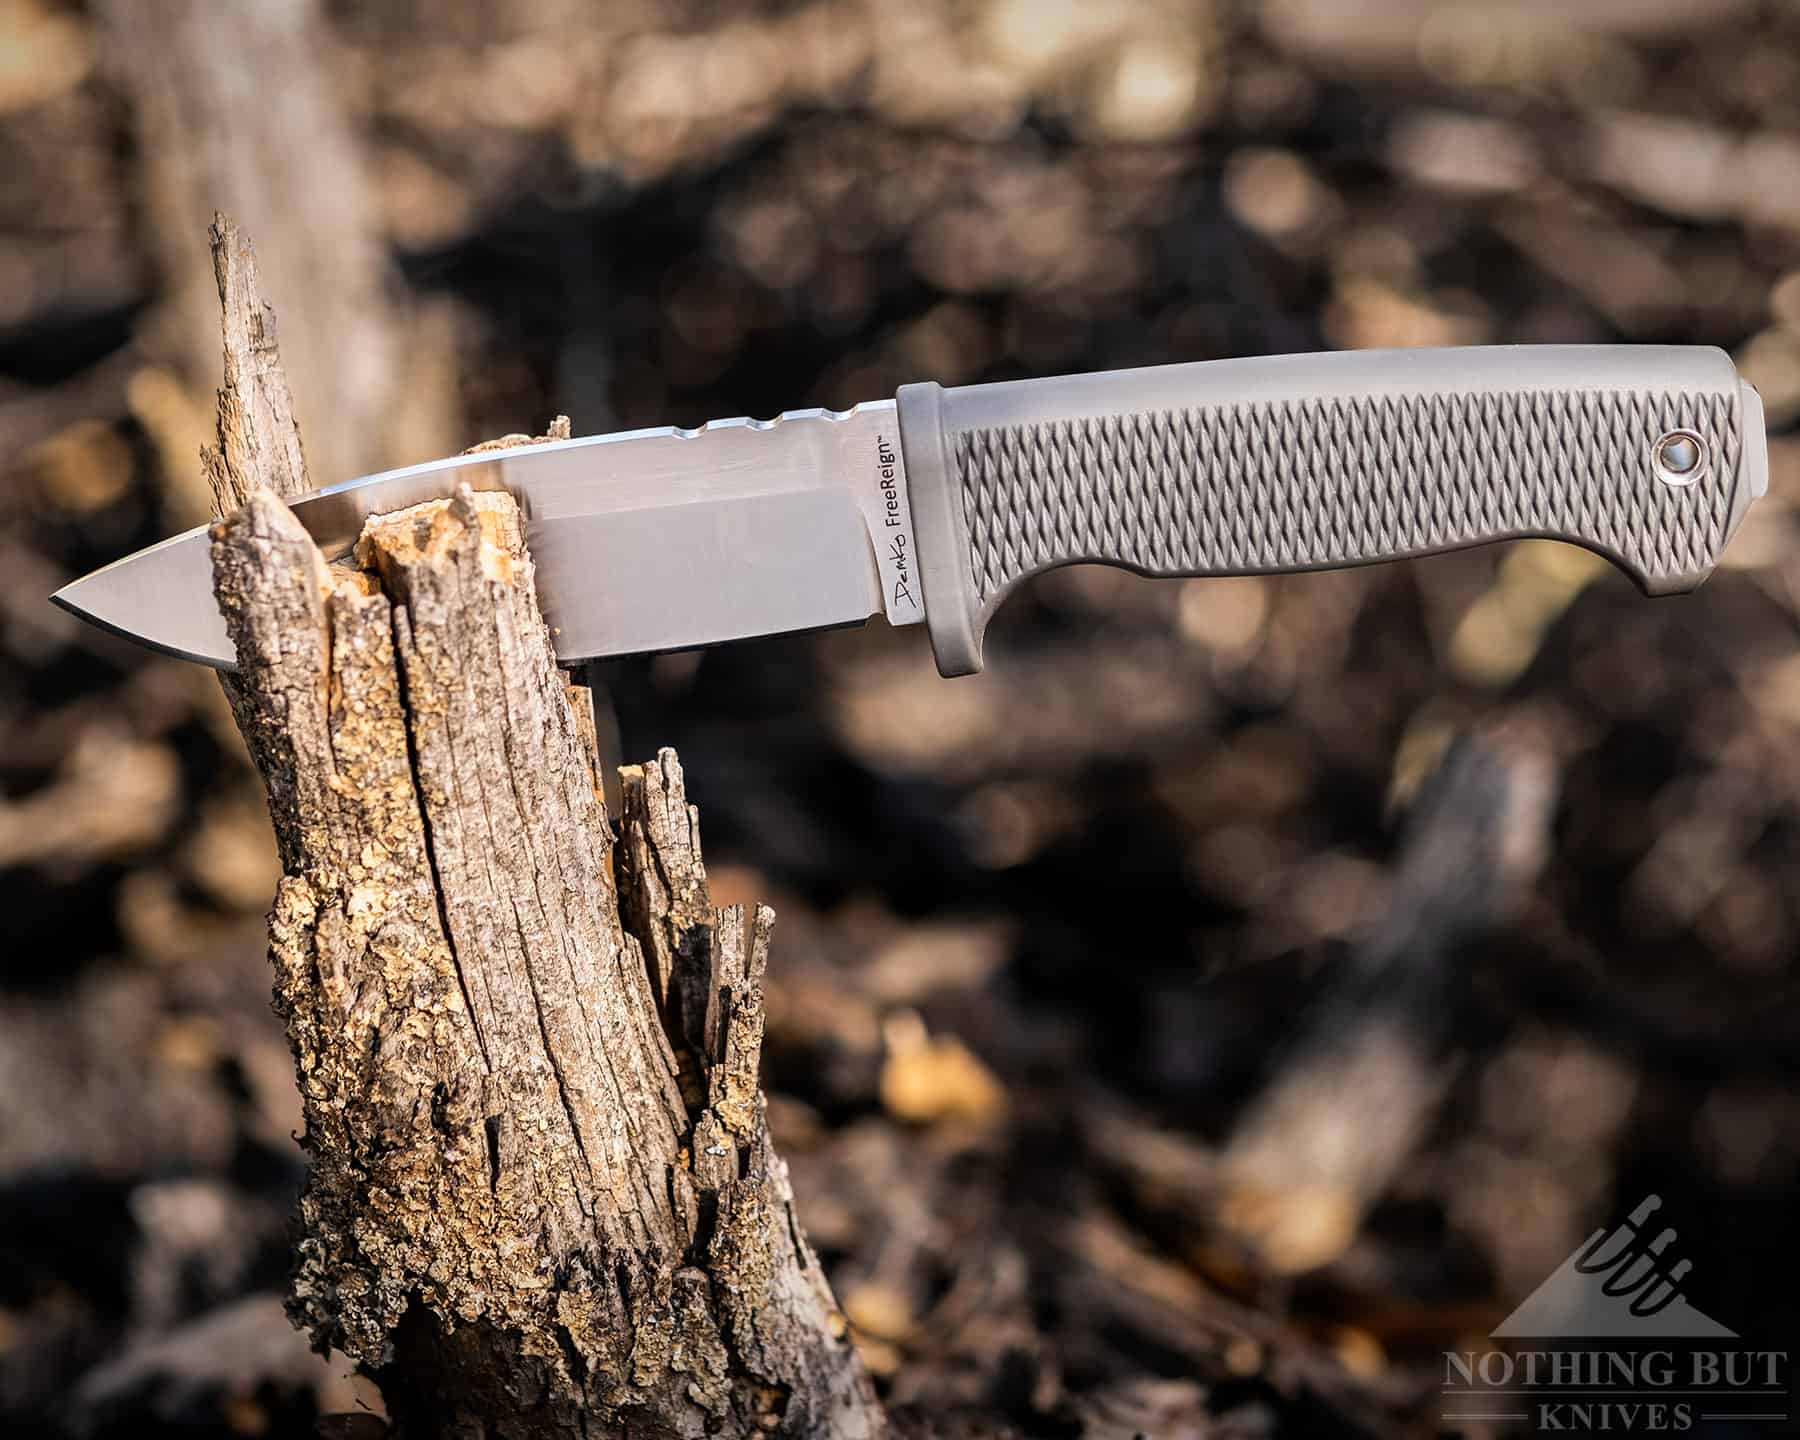 The FreeReign's Aus10A blade gets the job done.